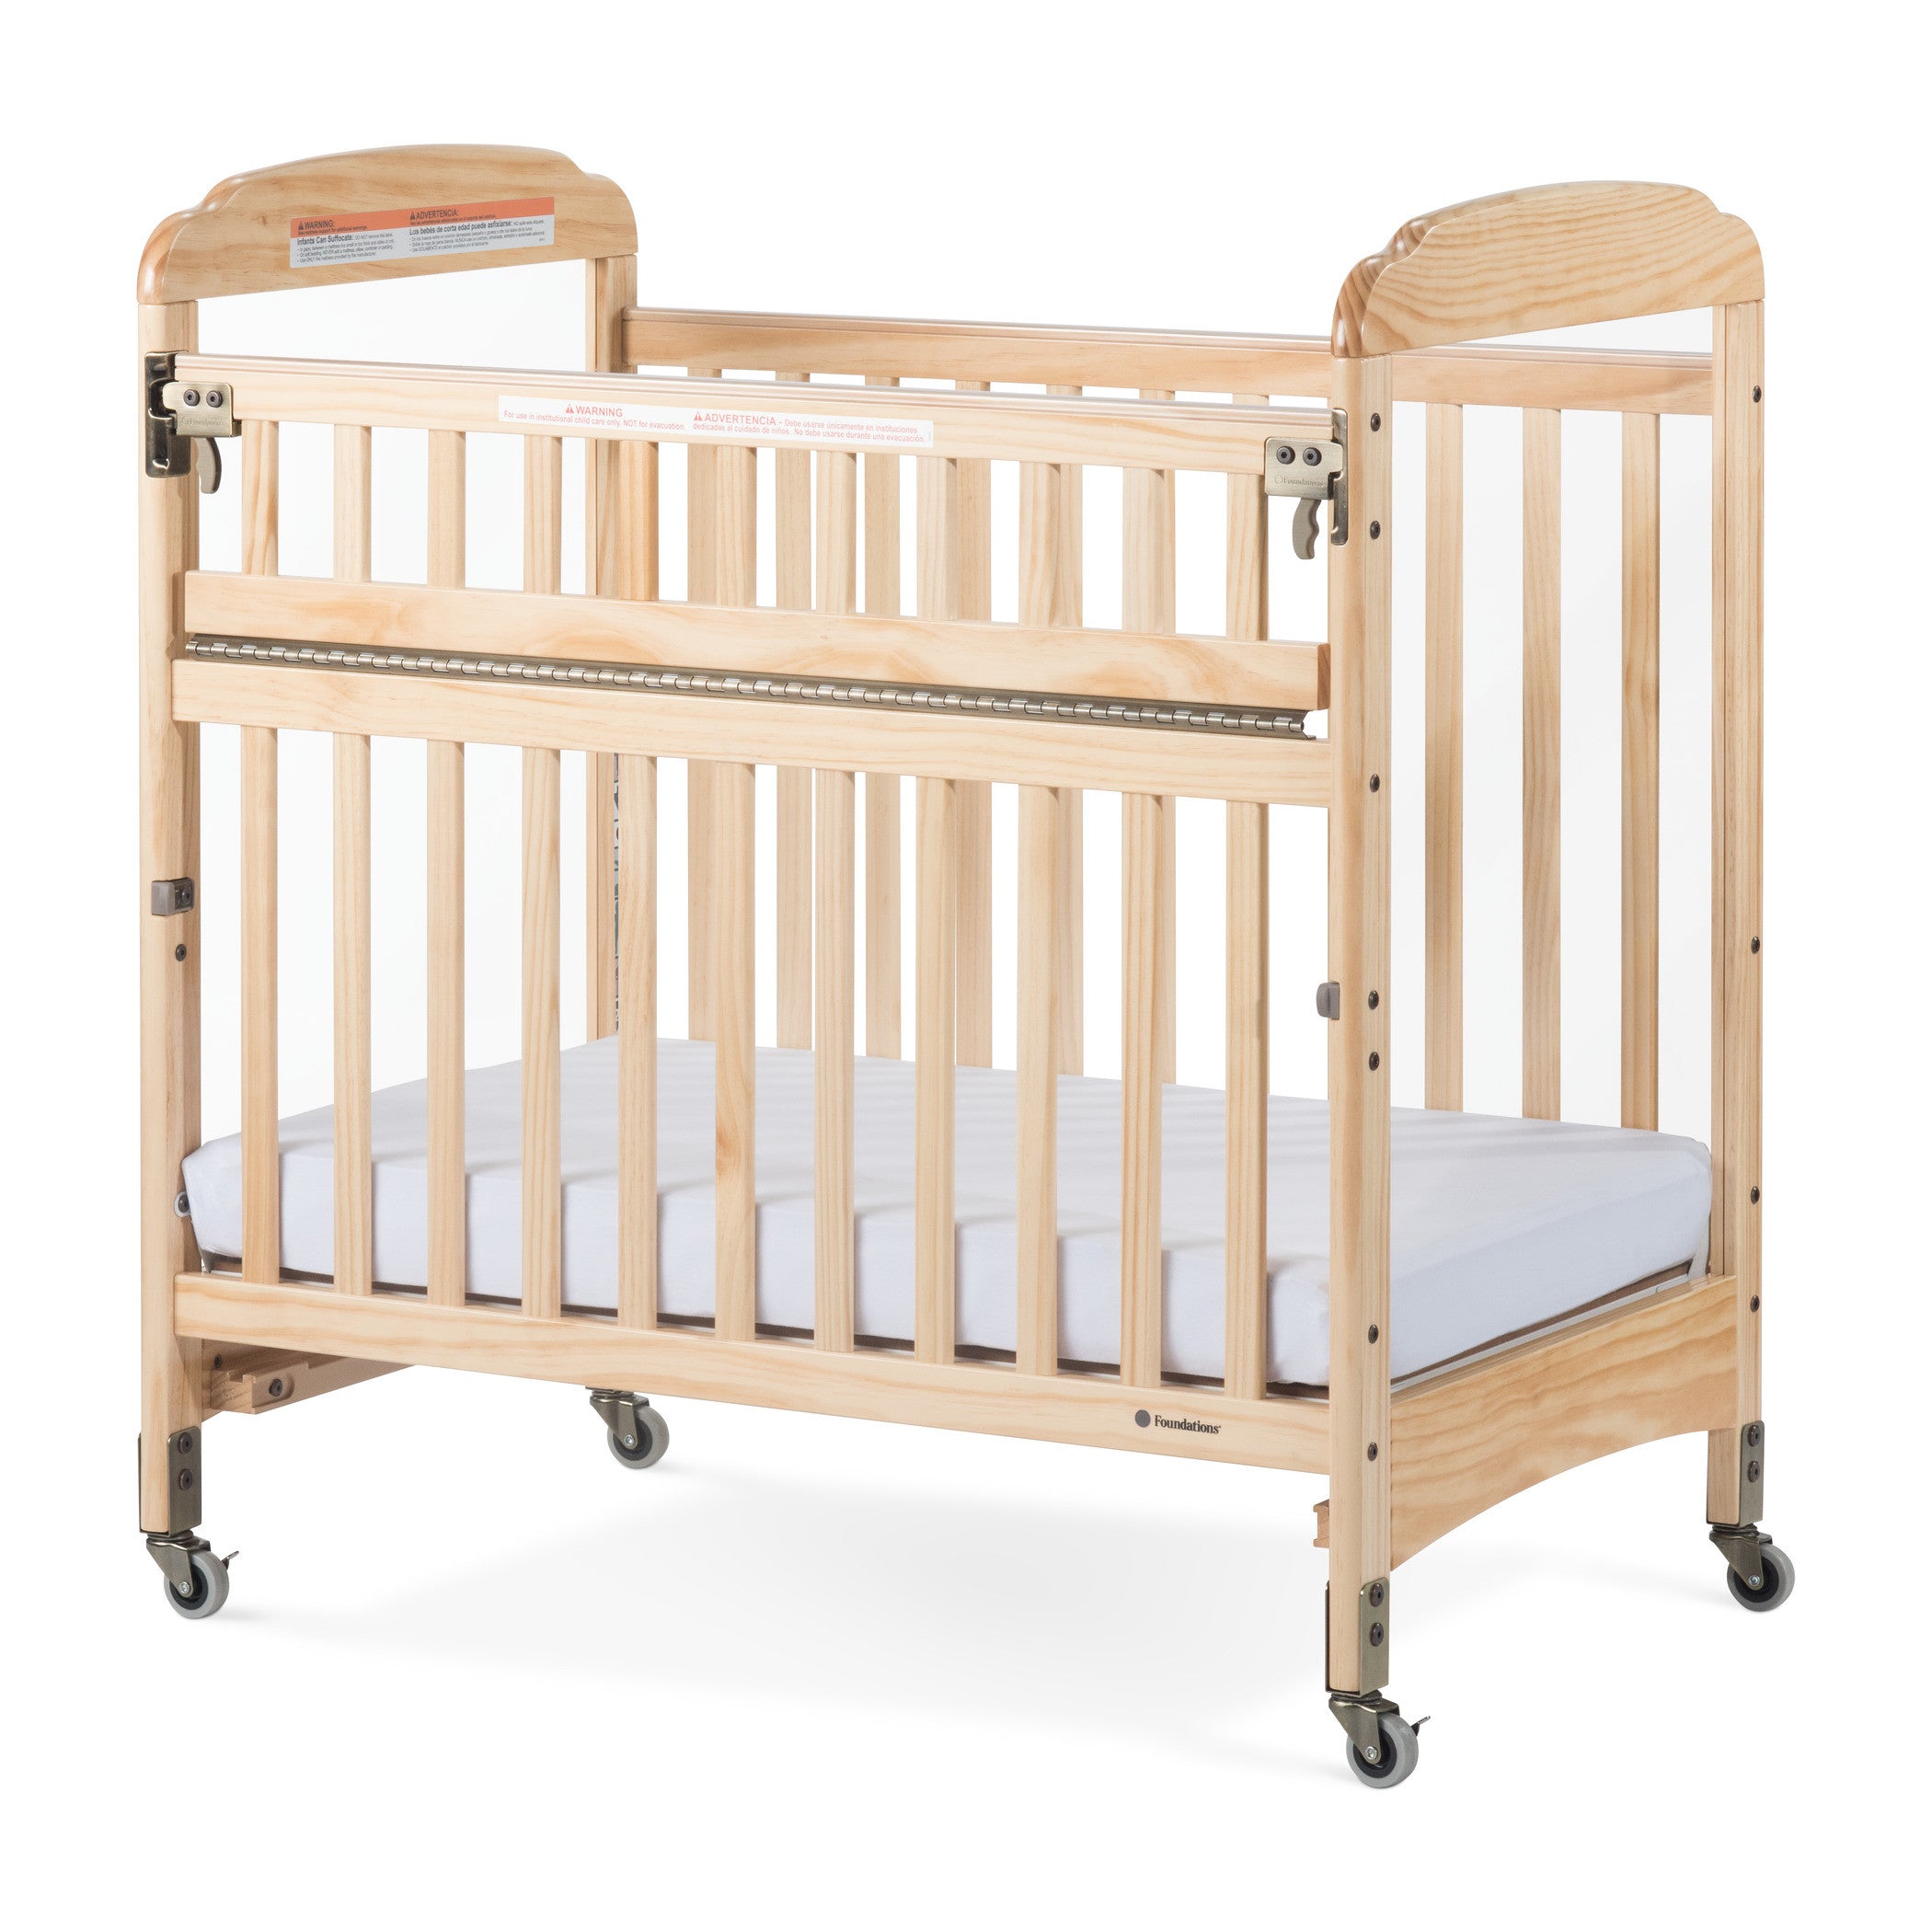 Next Gen Serenity Safereach Compact Clearview Mobile Crib, Natural